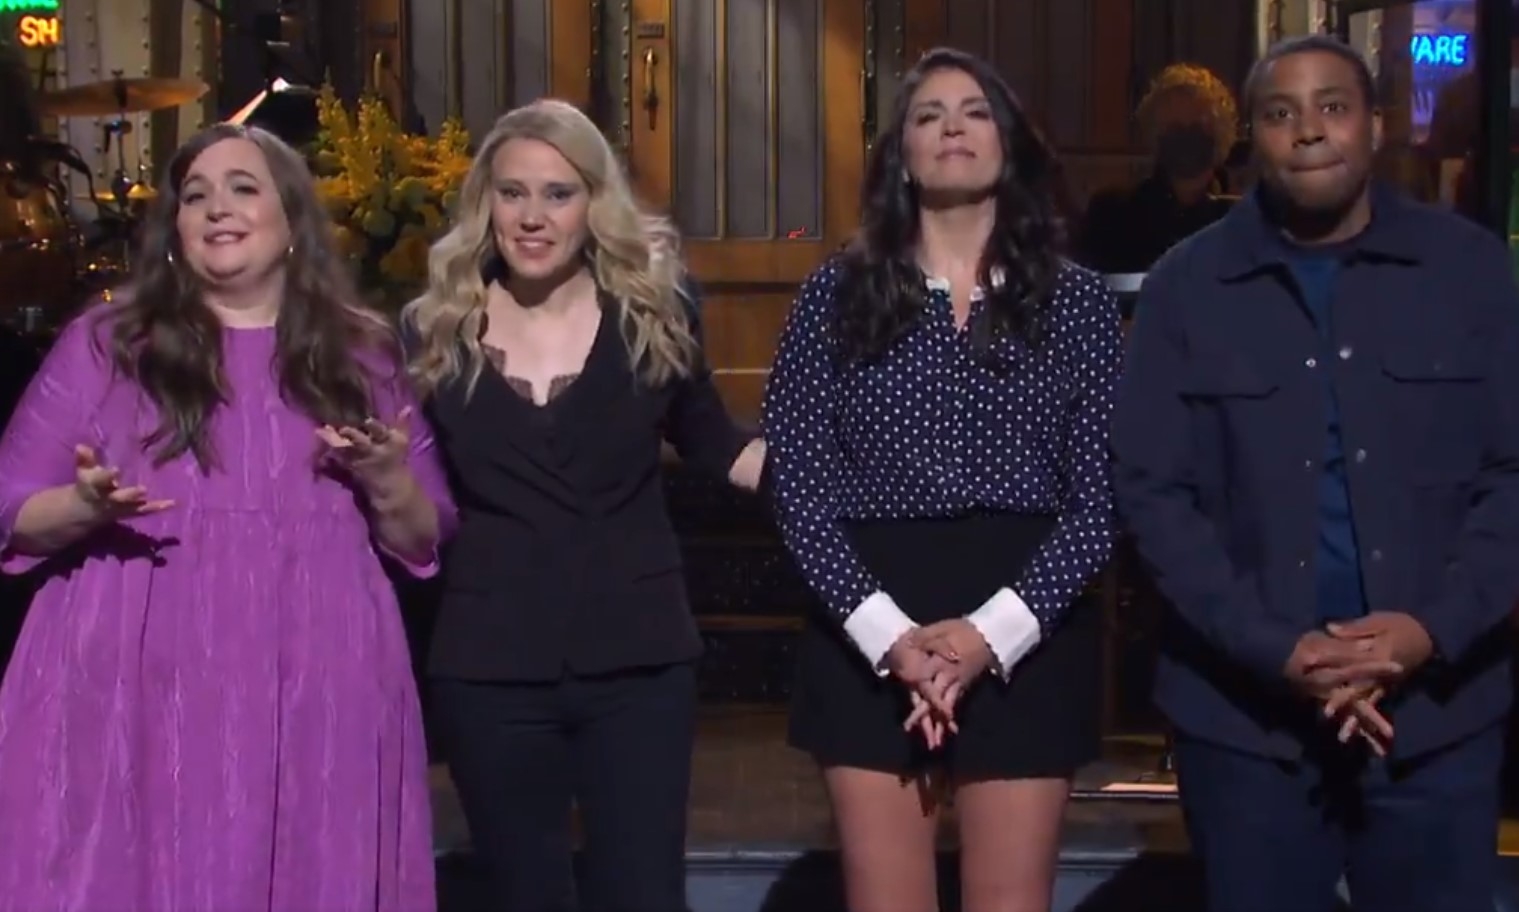 'SNL' cast remembers 'wild year' in emotional cold open during the show